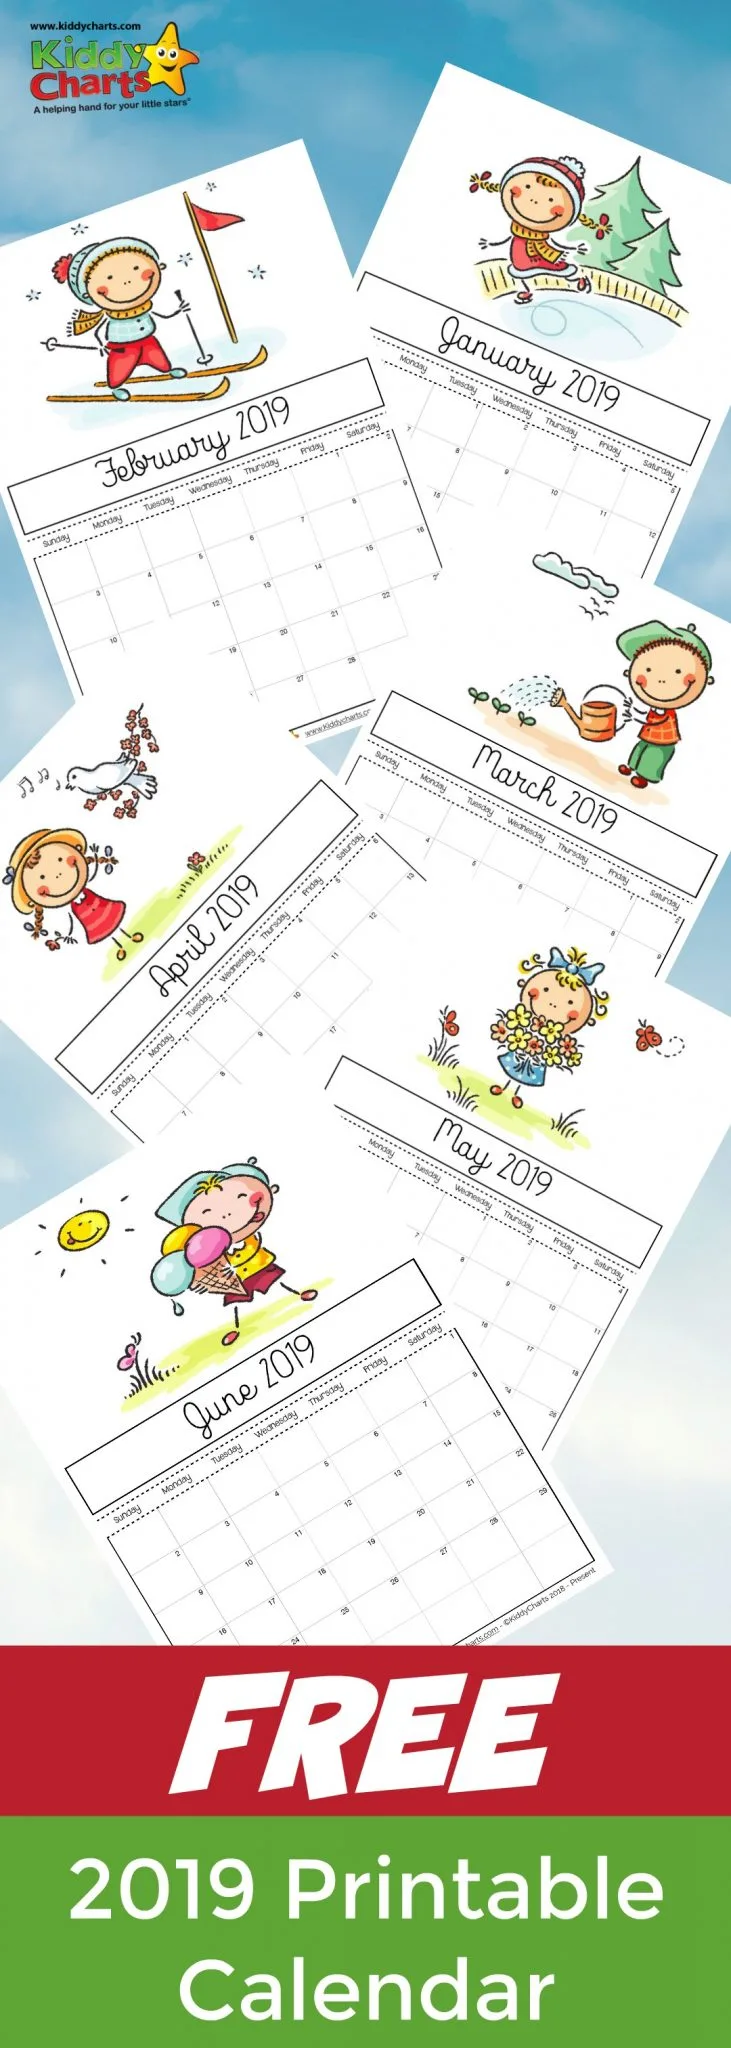 Lots of lovely pictures for the kids, that suit every season in the year, and give some ideas for what you might want to get up to with the kids every month too. #printables #2019calendar #kidsprintables